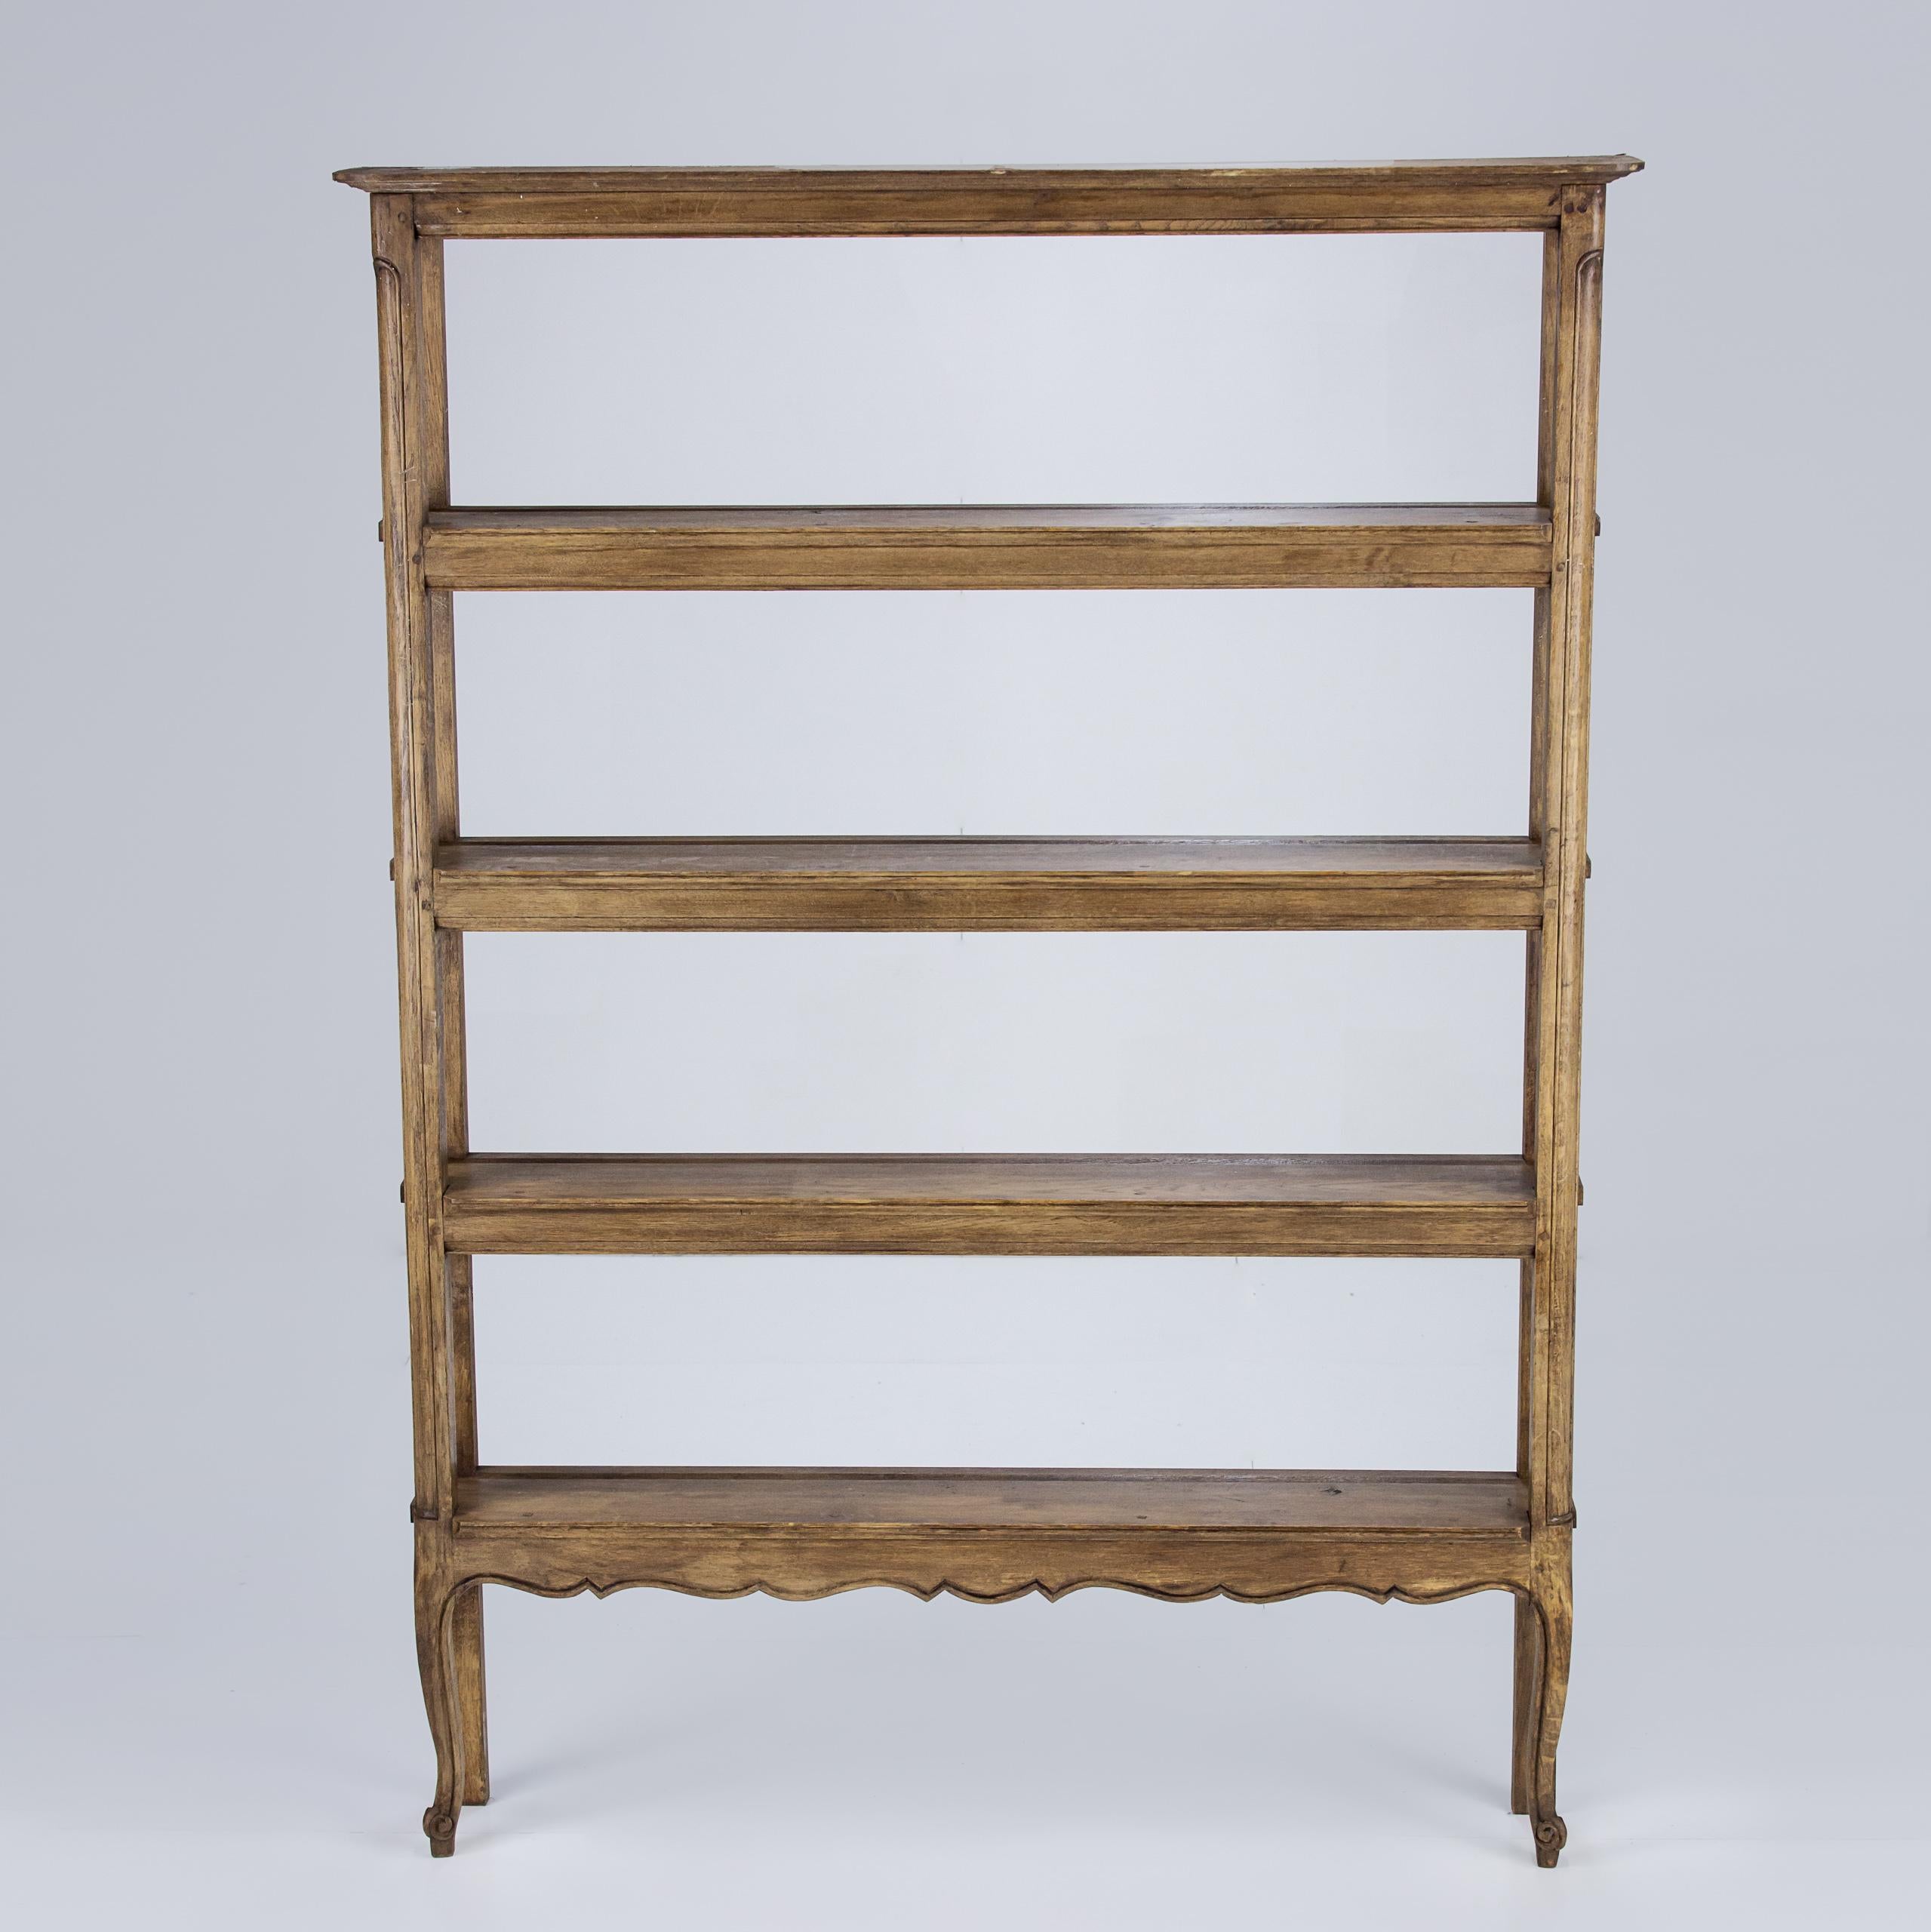 Impressive free standing display shelving. Louis XV style with cabriole leg.

Oak, Pegged construction.

France Circa 1880.